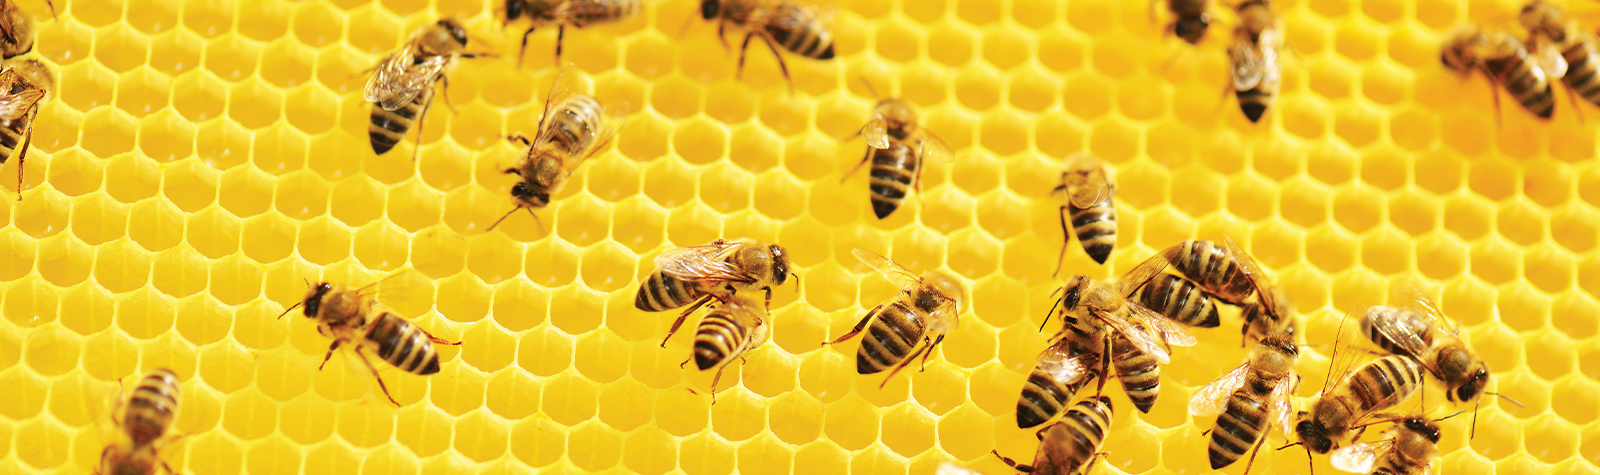 6 Propolis Benefits: The Brain-Boosting Nutrient That Comes from Bees